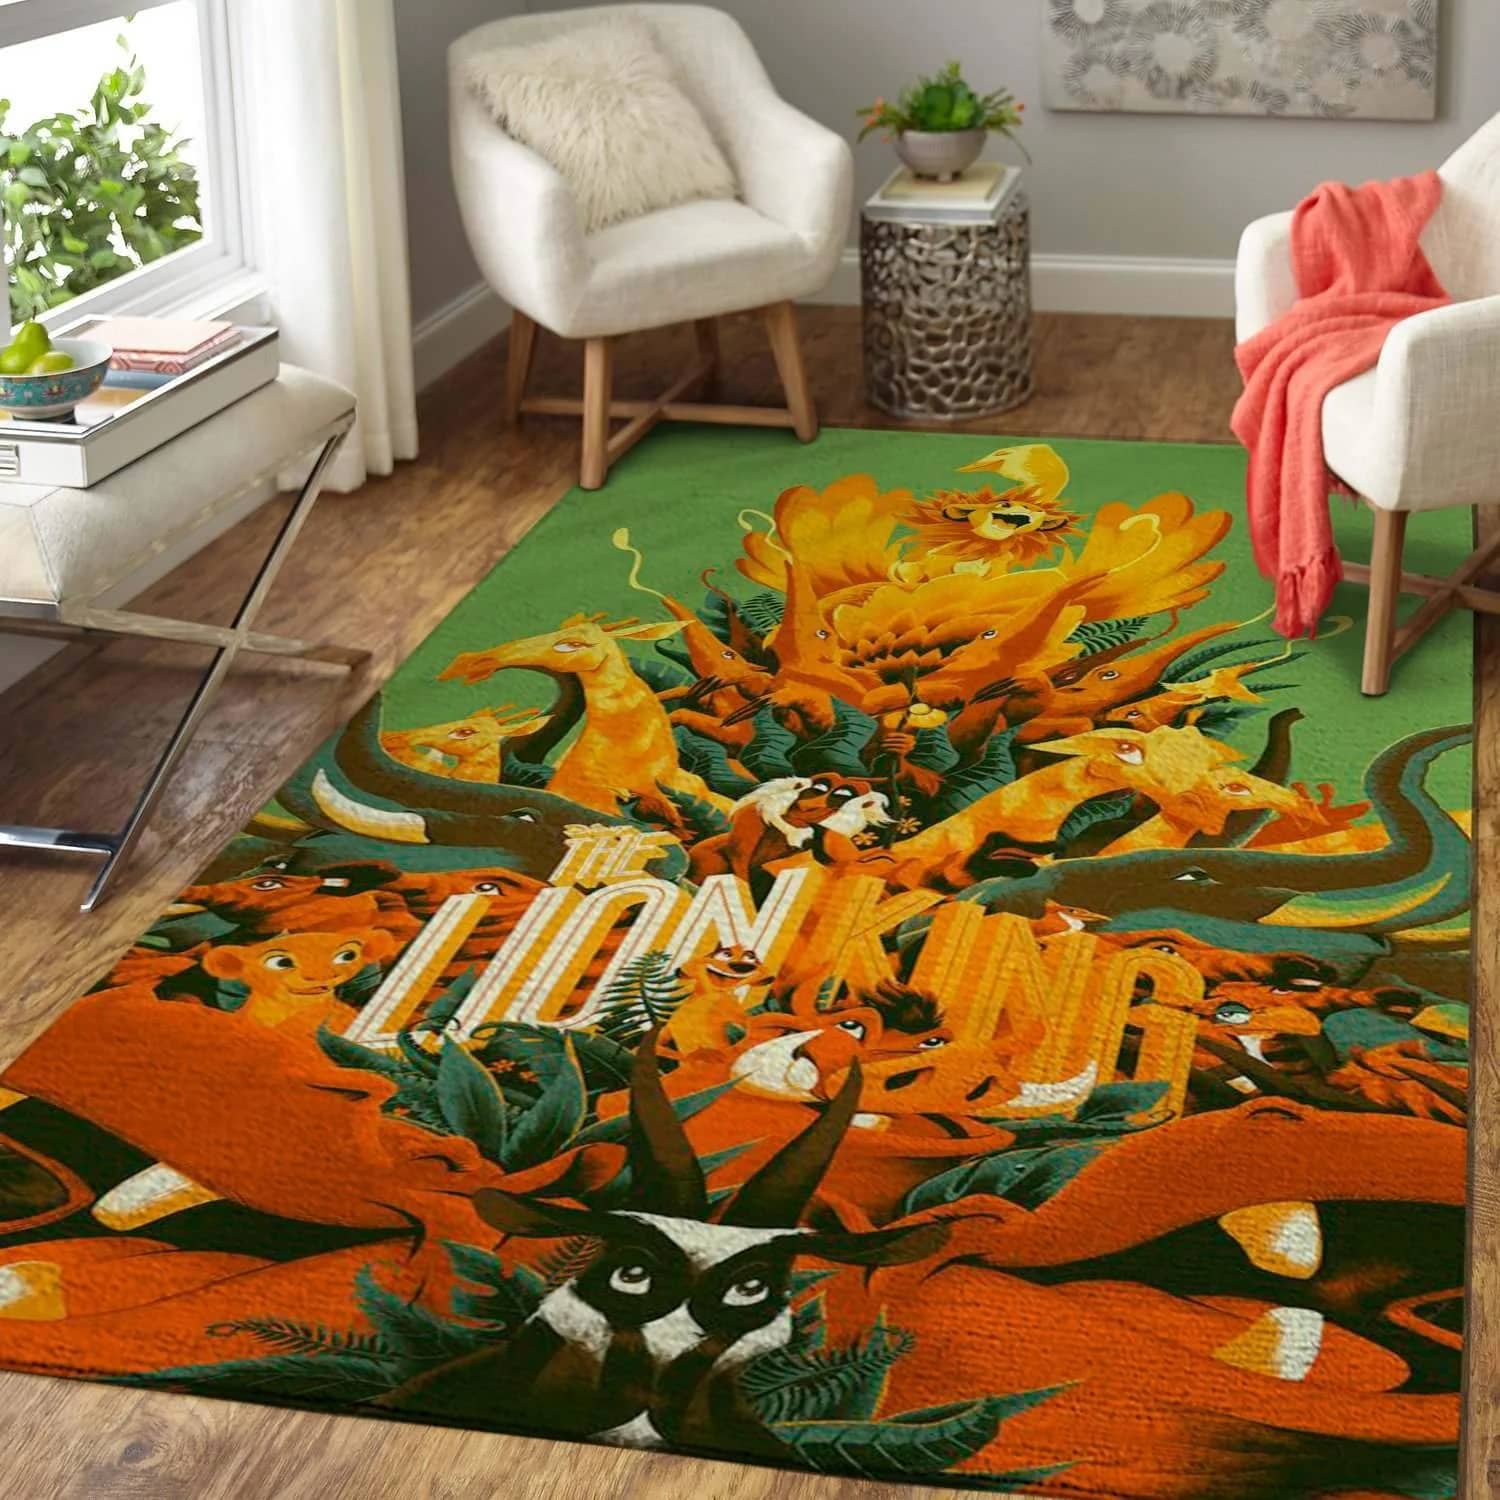 Disney Movie The Lion King Area Limited Edition Amazon Best Seller Sku 265044 Rug